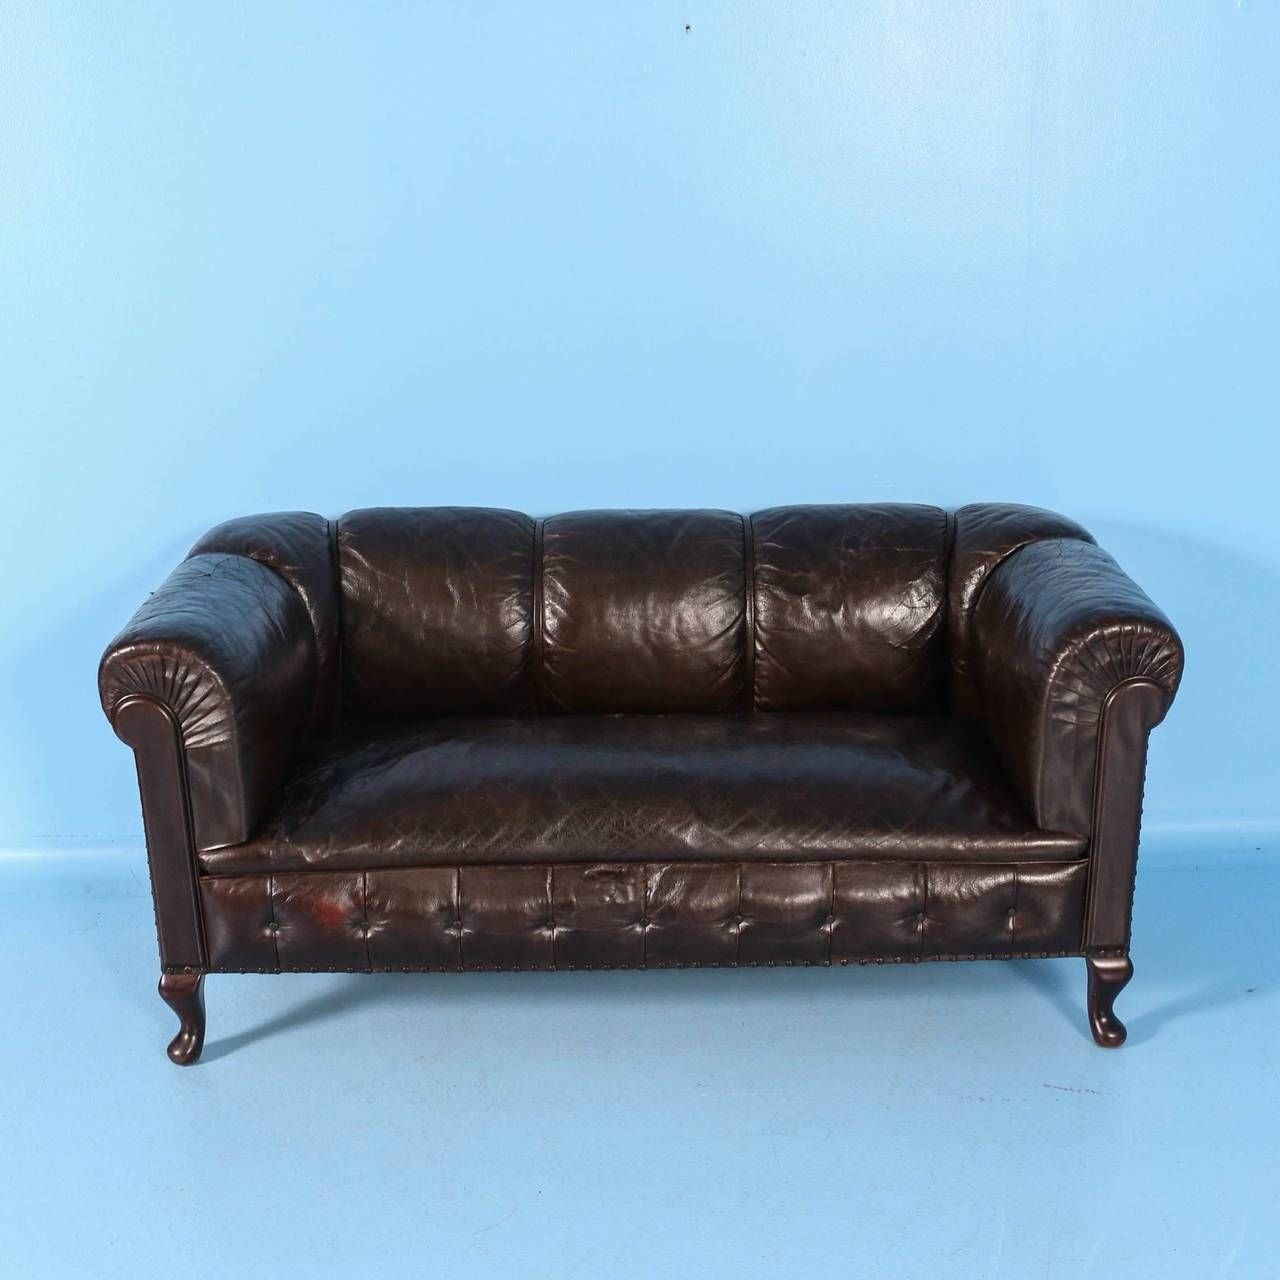 Small Vintage Chesterfield Sofa, England, Circa 1920 – 1940 At 1stdibs Pertaining To Small Chesterfield Sofas (View 23 of 30)